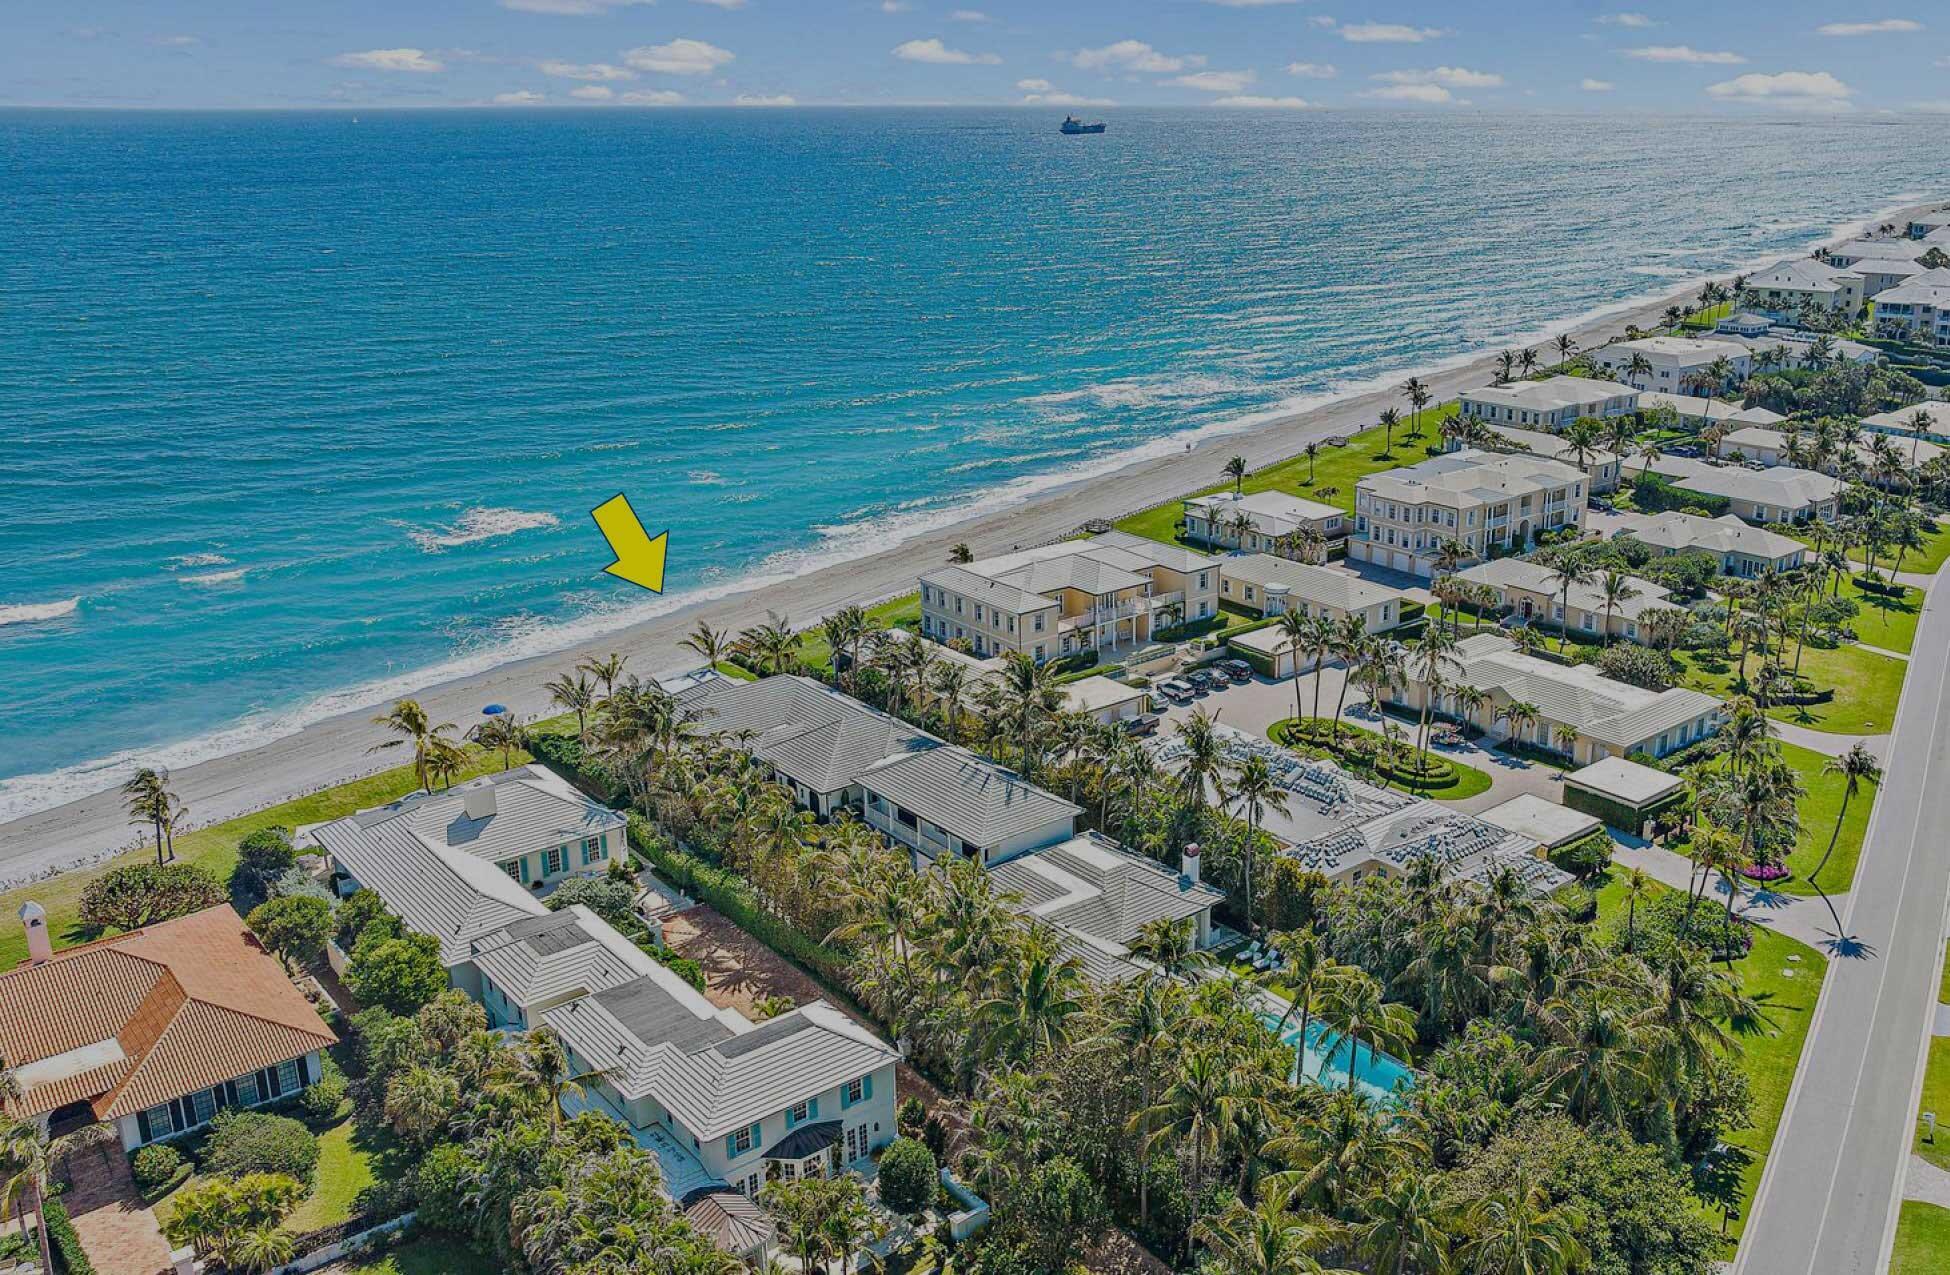 Welcome to 11432 Turtle Beach Road, a true oceanfront oasis that is the perfect marriage of elegance and casual beach living.  The owners completely renovated and created an ultra-luxurious, distinctive masterpiece where no expense was spared.  One can simply show up tomorrow to enjoy the highest of quality finishes and a floor plan that is functional yet beautiful.  With its own separate guest and living quarters one can enjoy the east and west exposures, breezes, and abundance of natural light.  It's truly a perfect, once in a lifetime home for your family to enjoy.